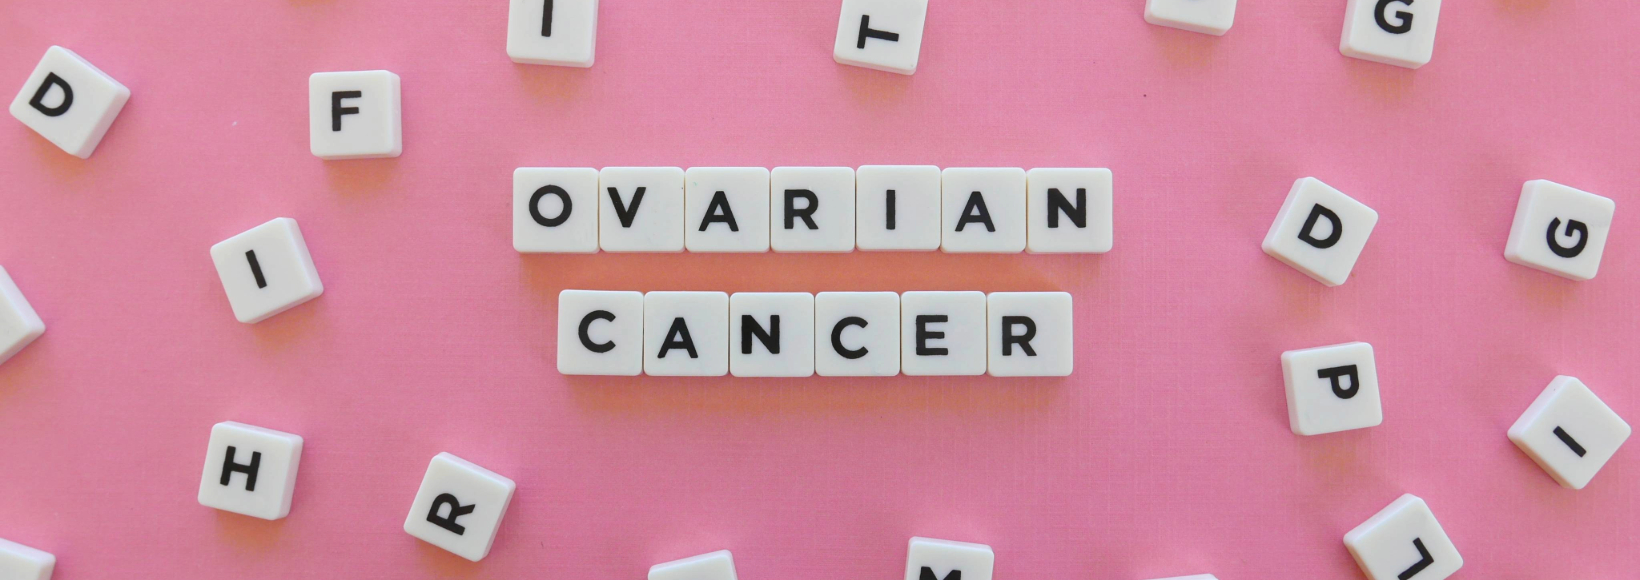 learn how you can prevent ovarian cancer and detect it early